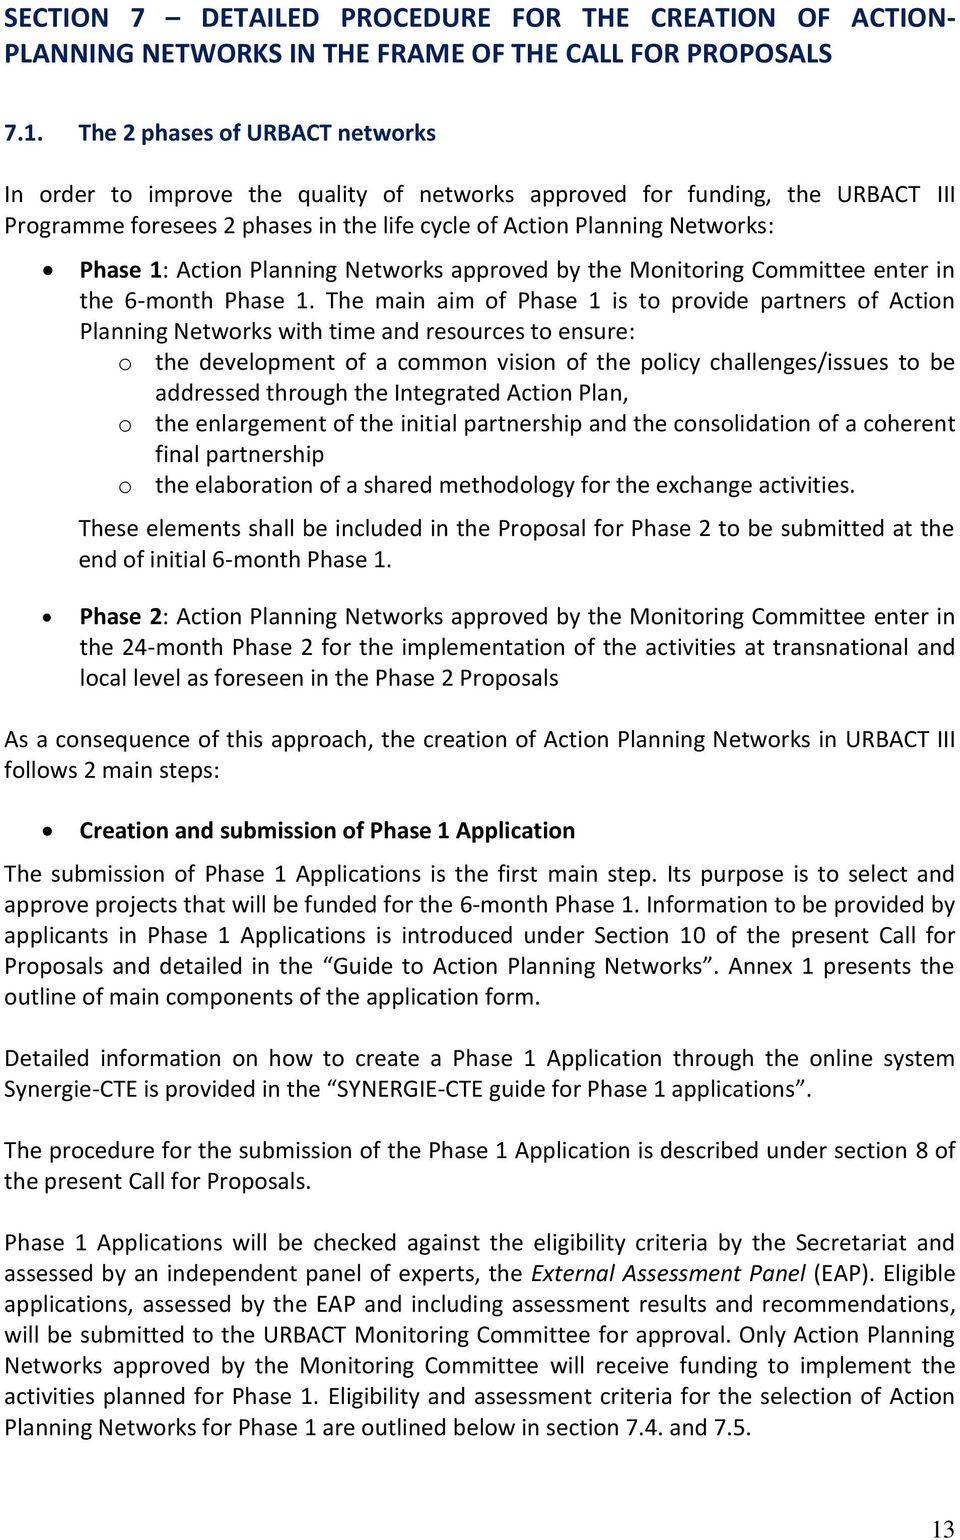 Action Planning Networks approved by the Monitoring Committee enter in the 6-month Phase 1.